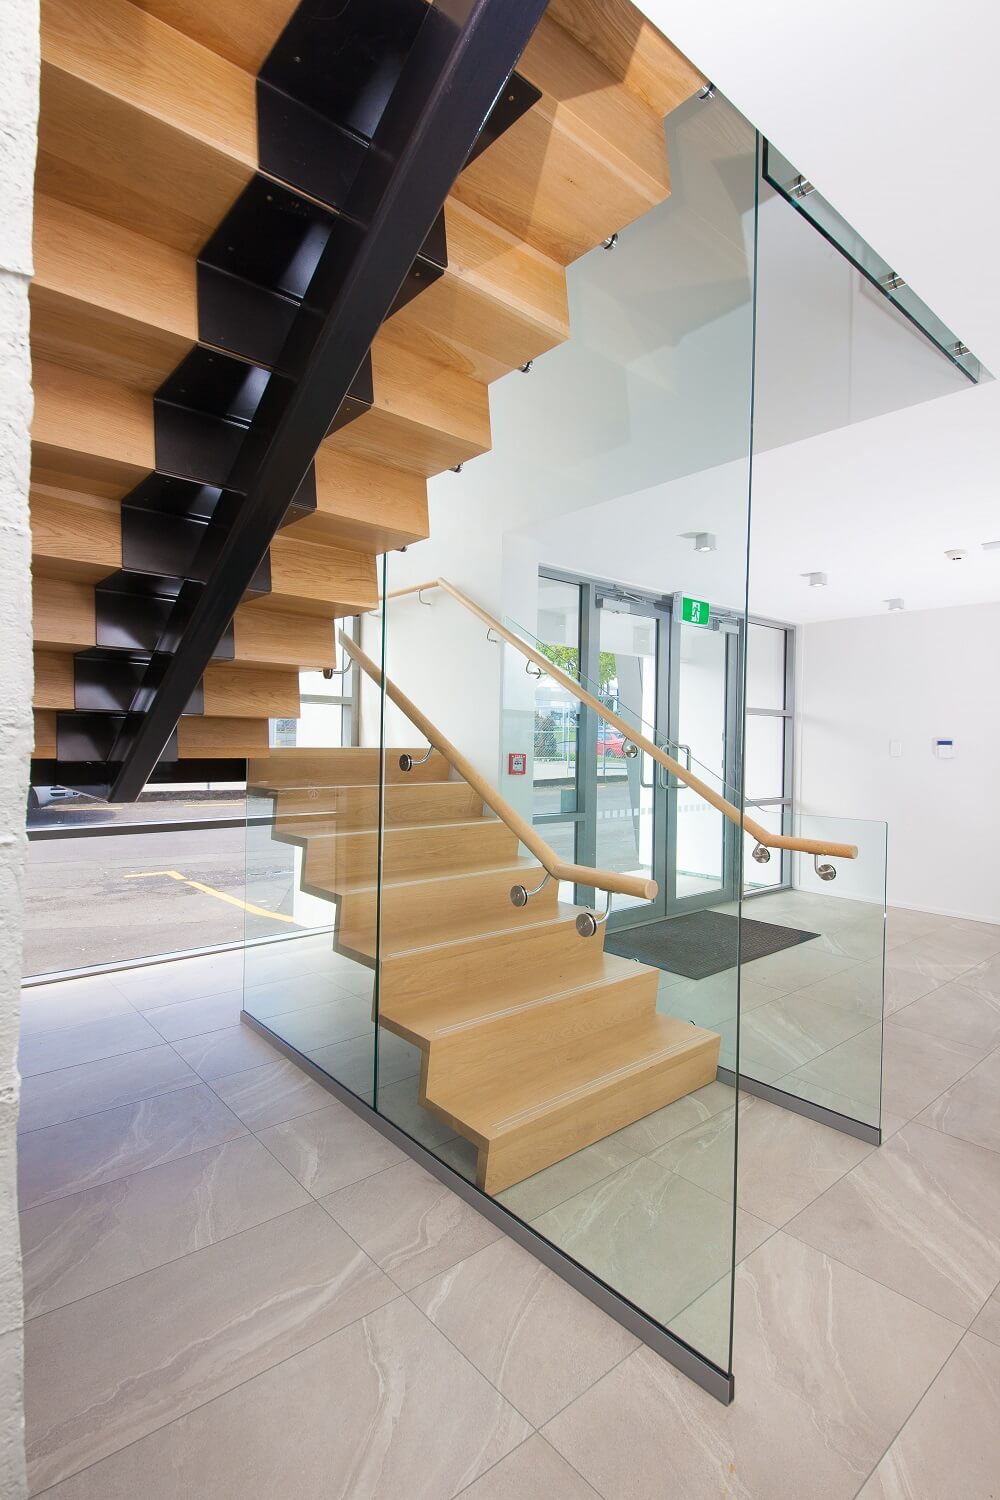 Commercial building stairs